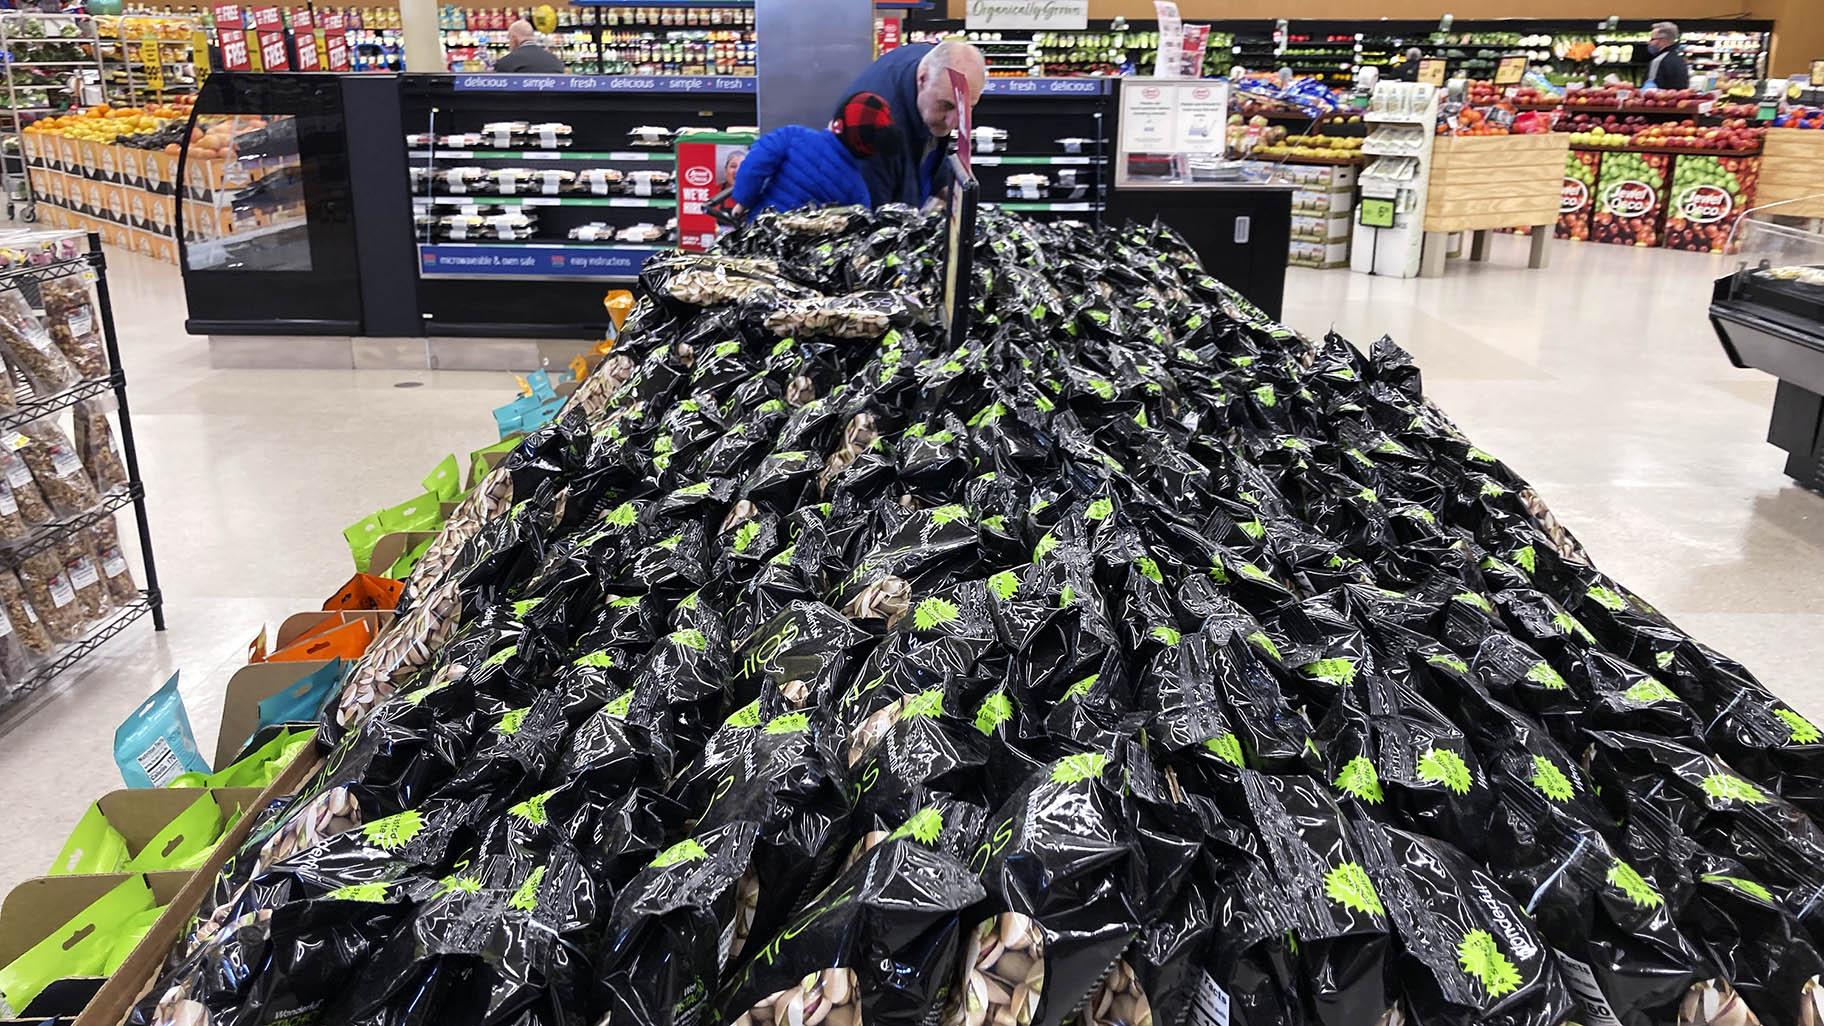 Bags of Pistachios are displayed at a grocery store in Mount Prospect, Ill., on, April 1, 2022. (AP Photo/Nam Y. Huh)